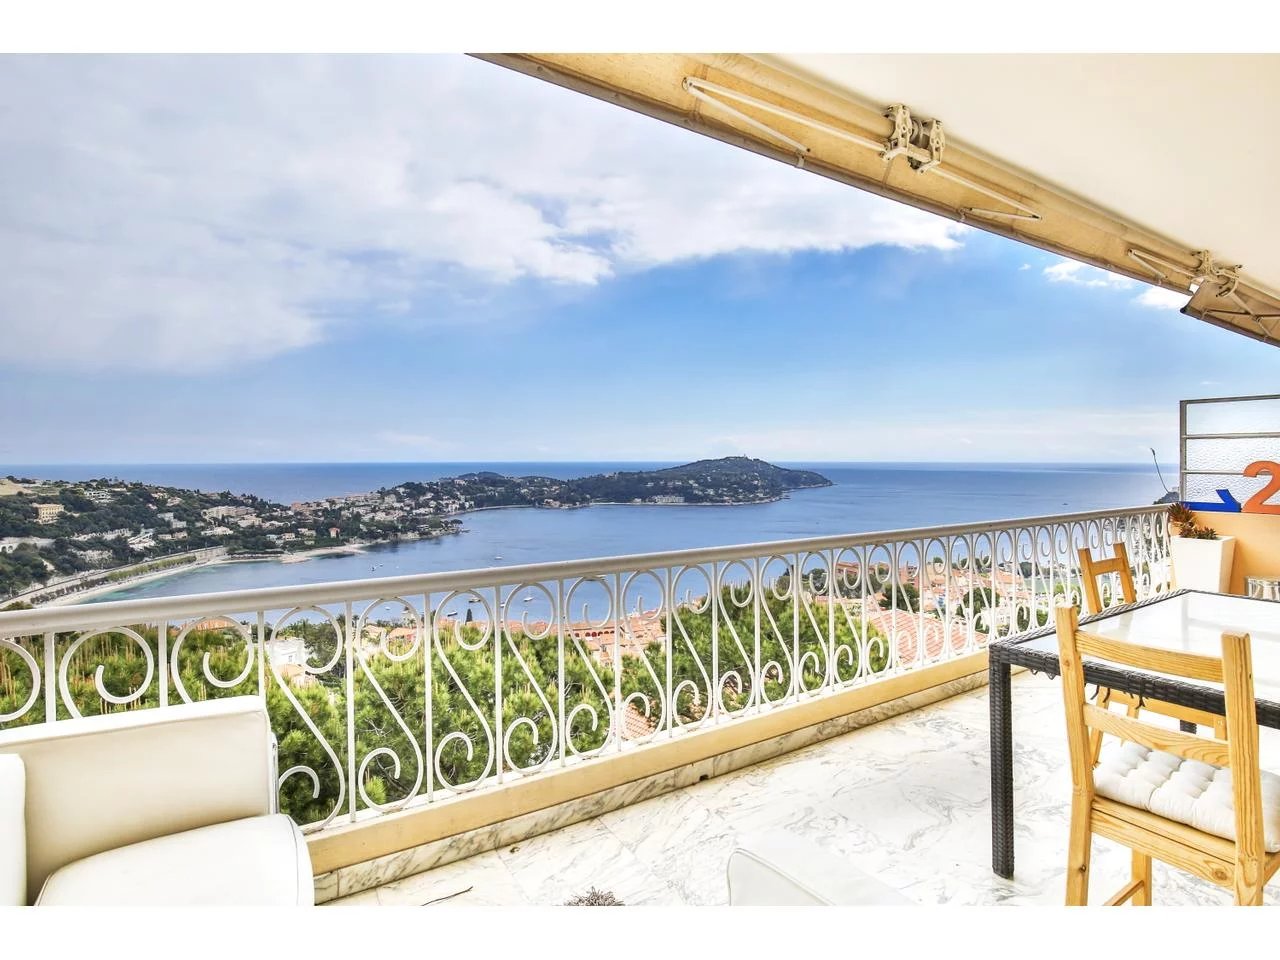 Apartment with fabulous views over Villefranche-sur-mer